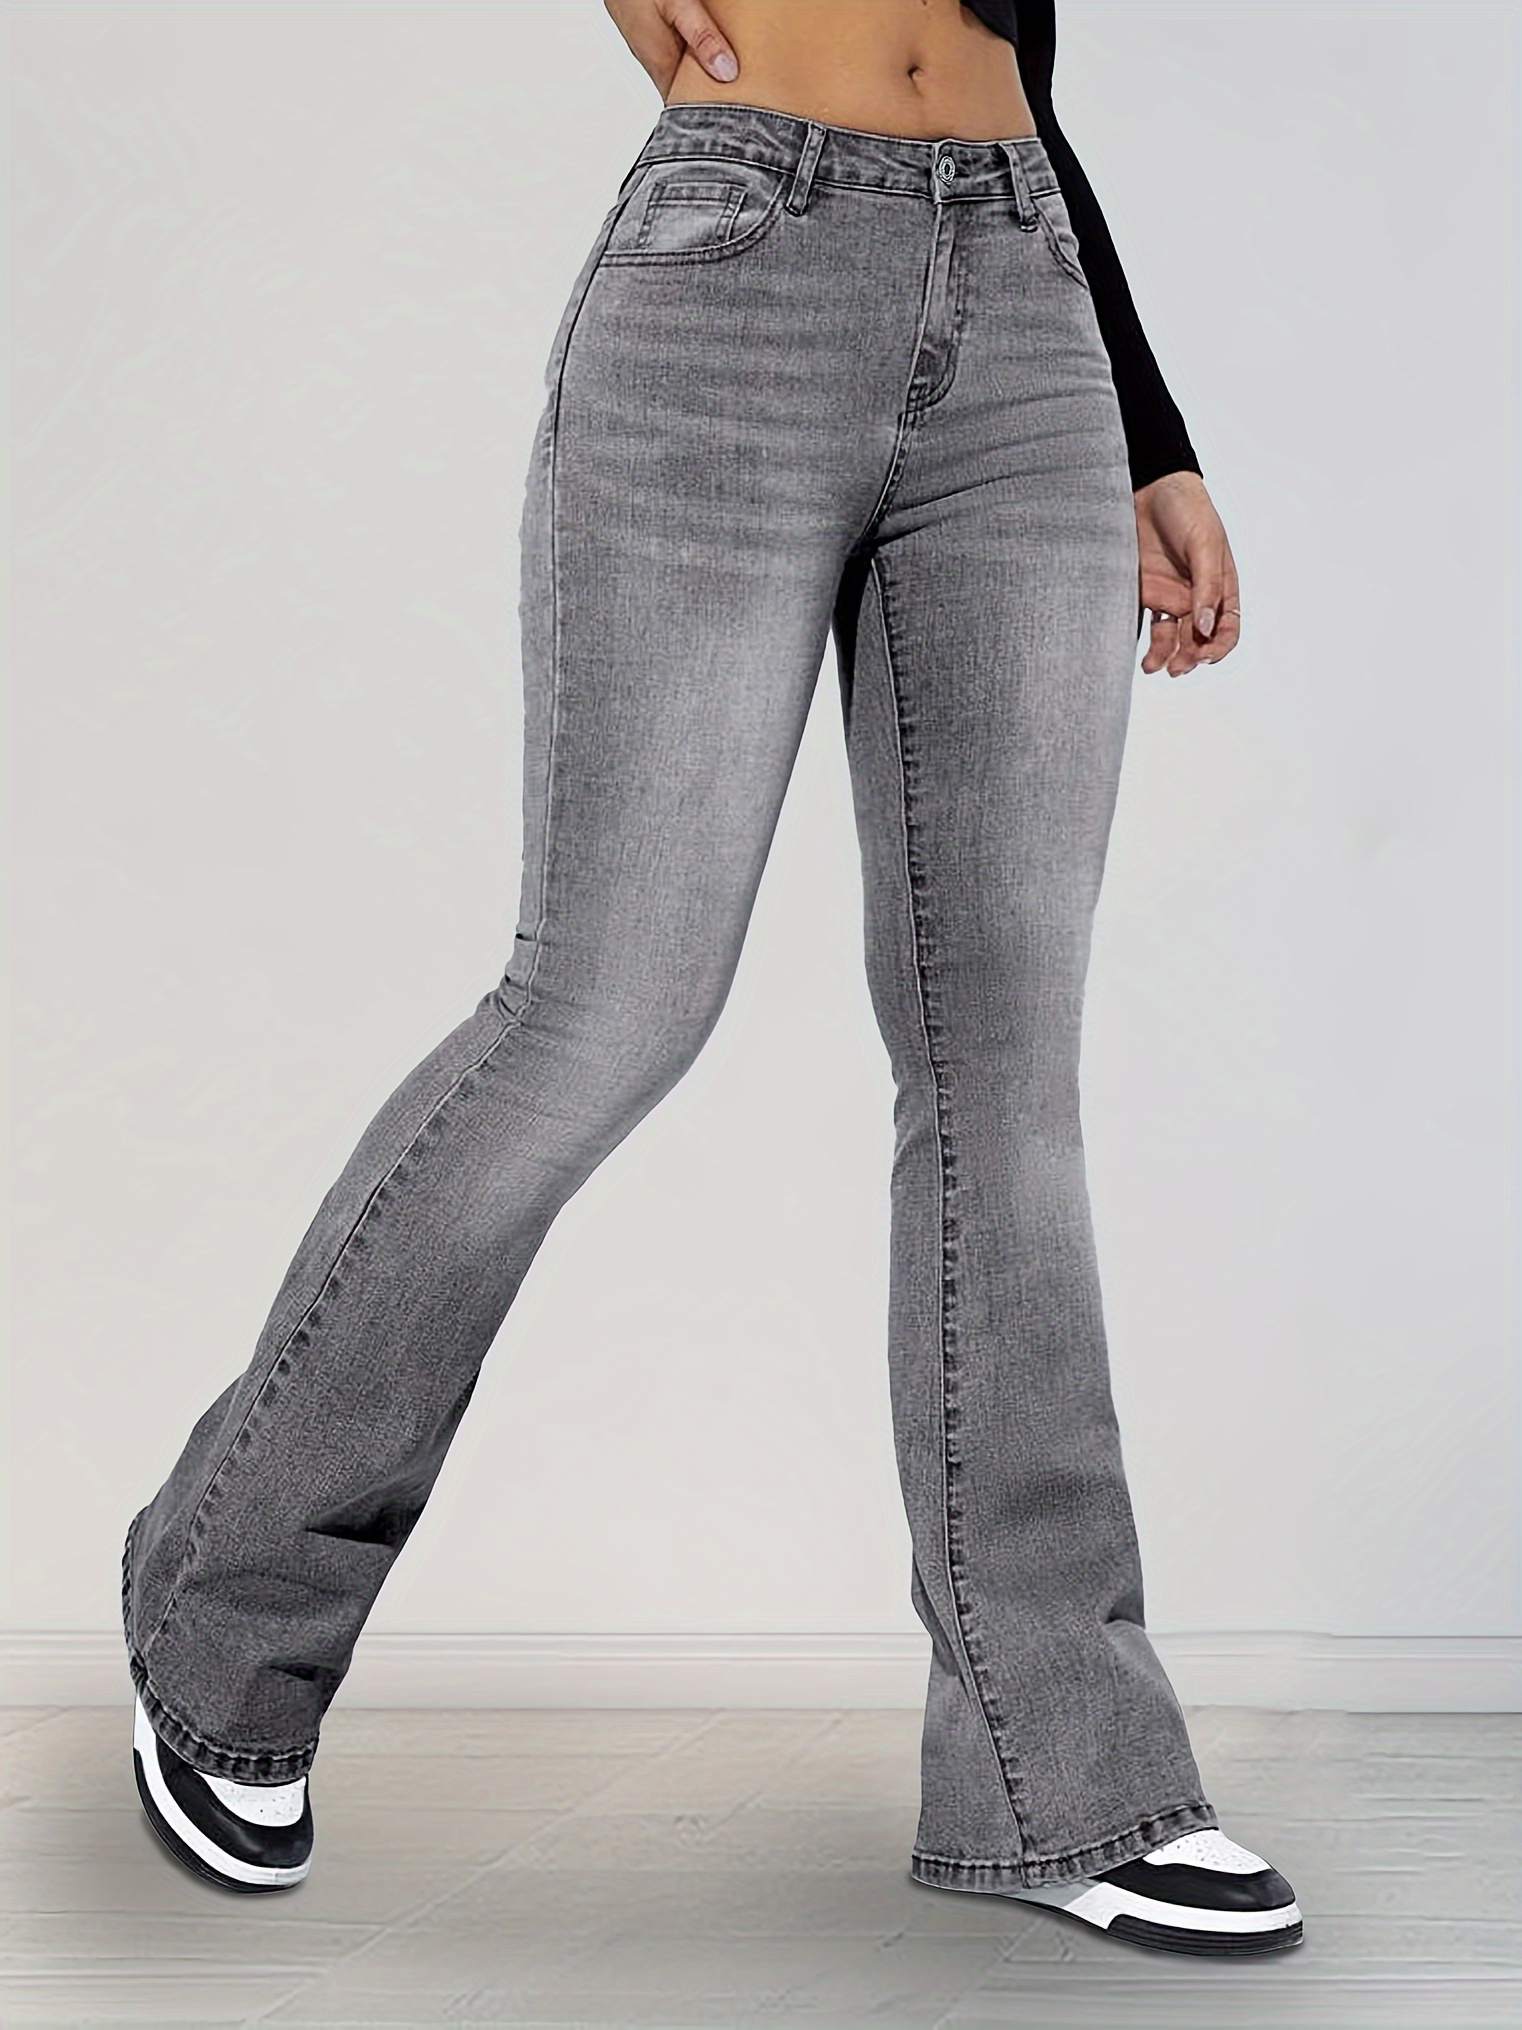 Jeans Grises Mujer - Temu Chile